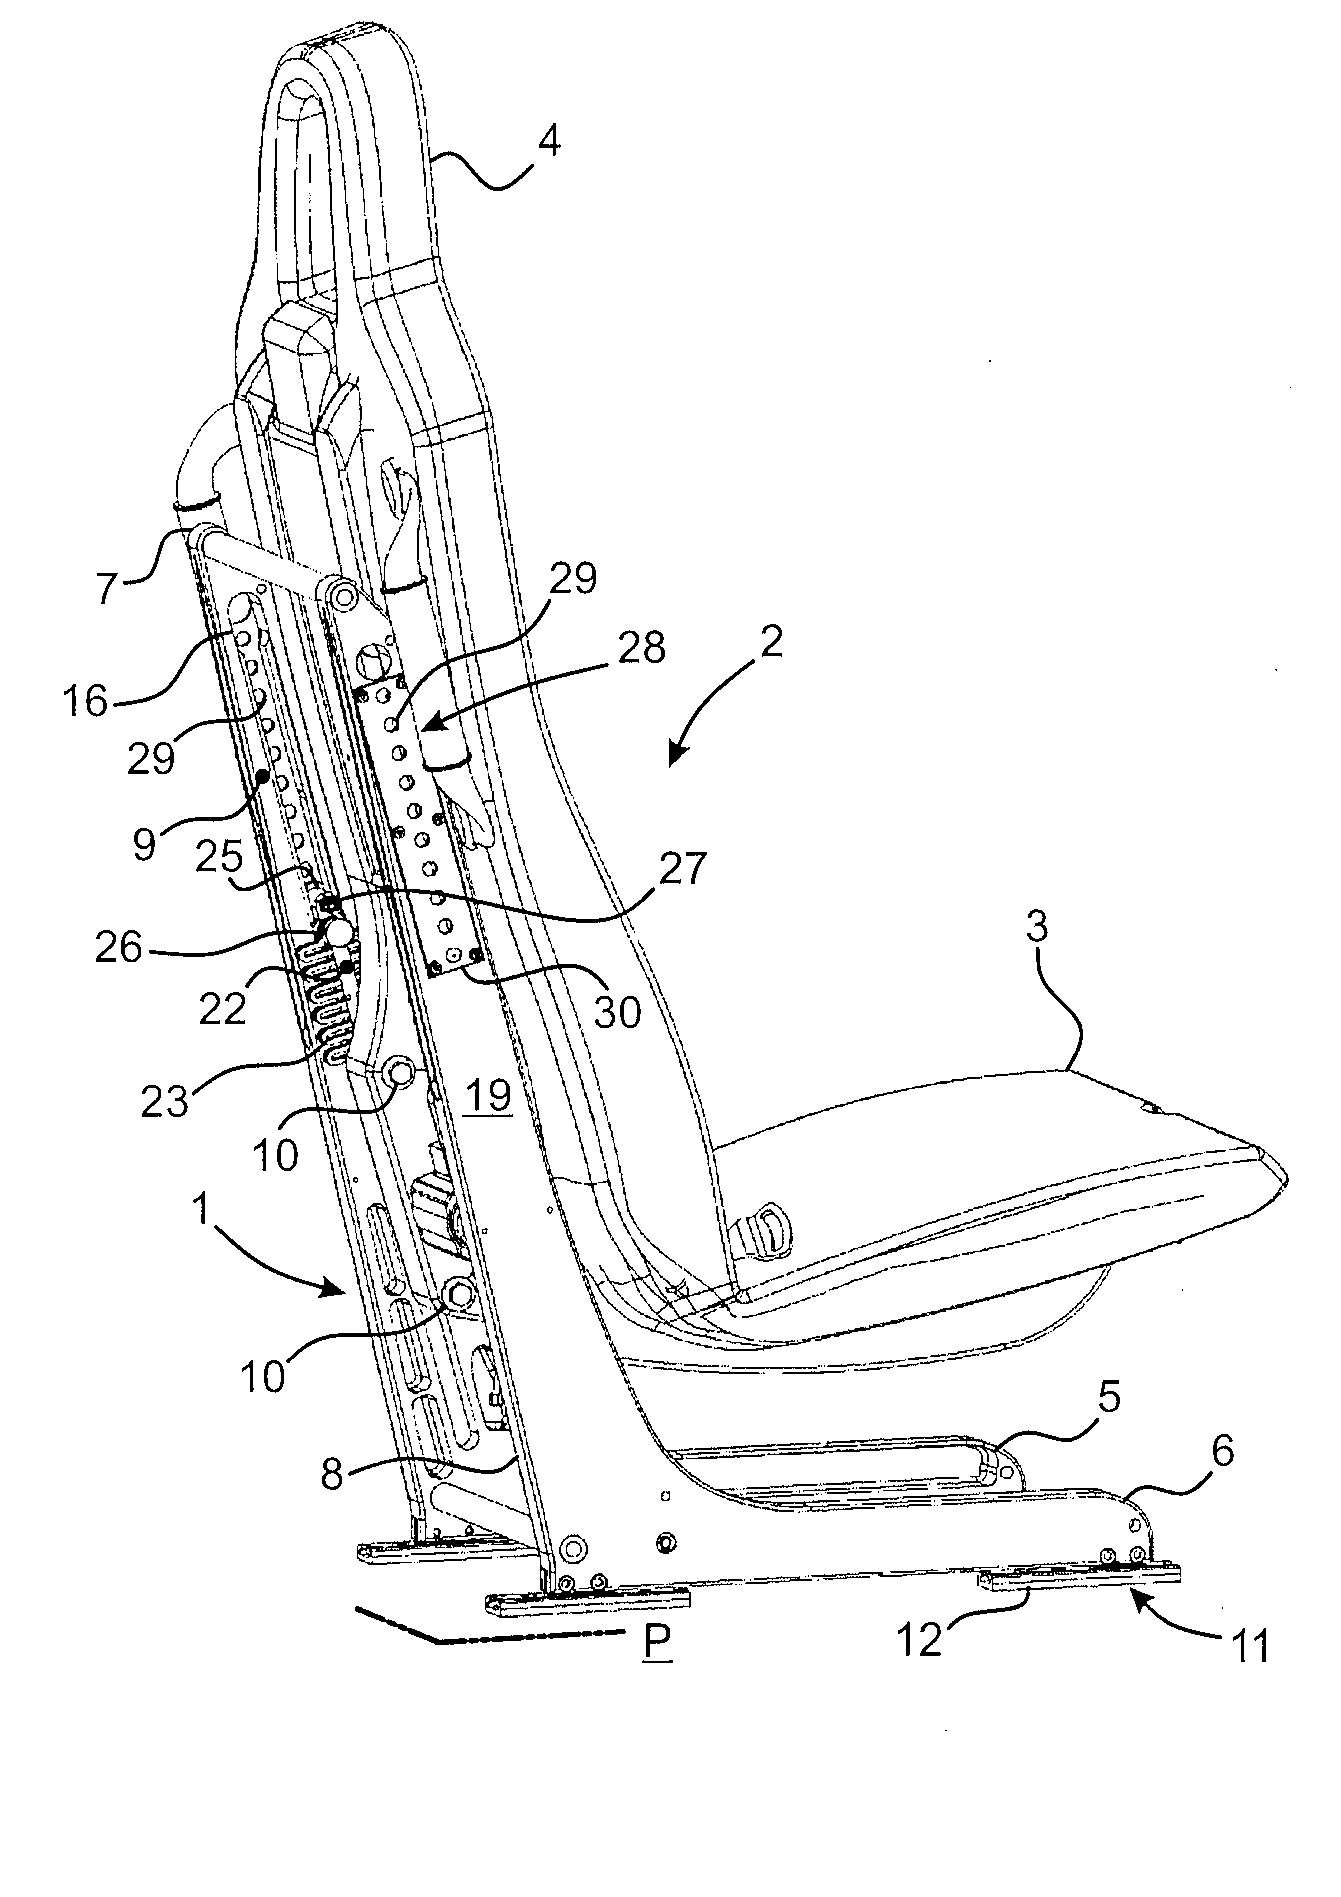 Seat for powered aircraft, the seat incorporating means for protecting its passenger in the event of a crash